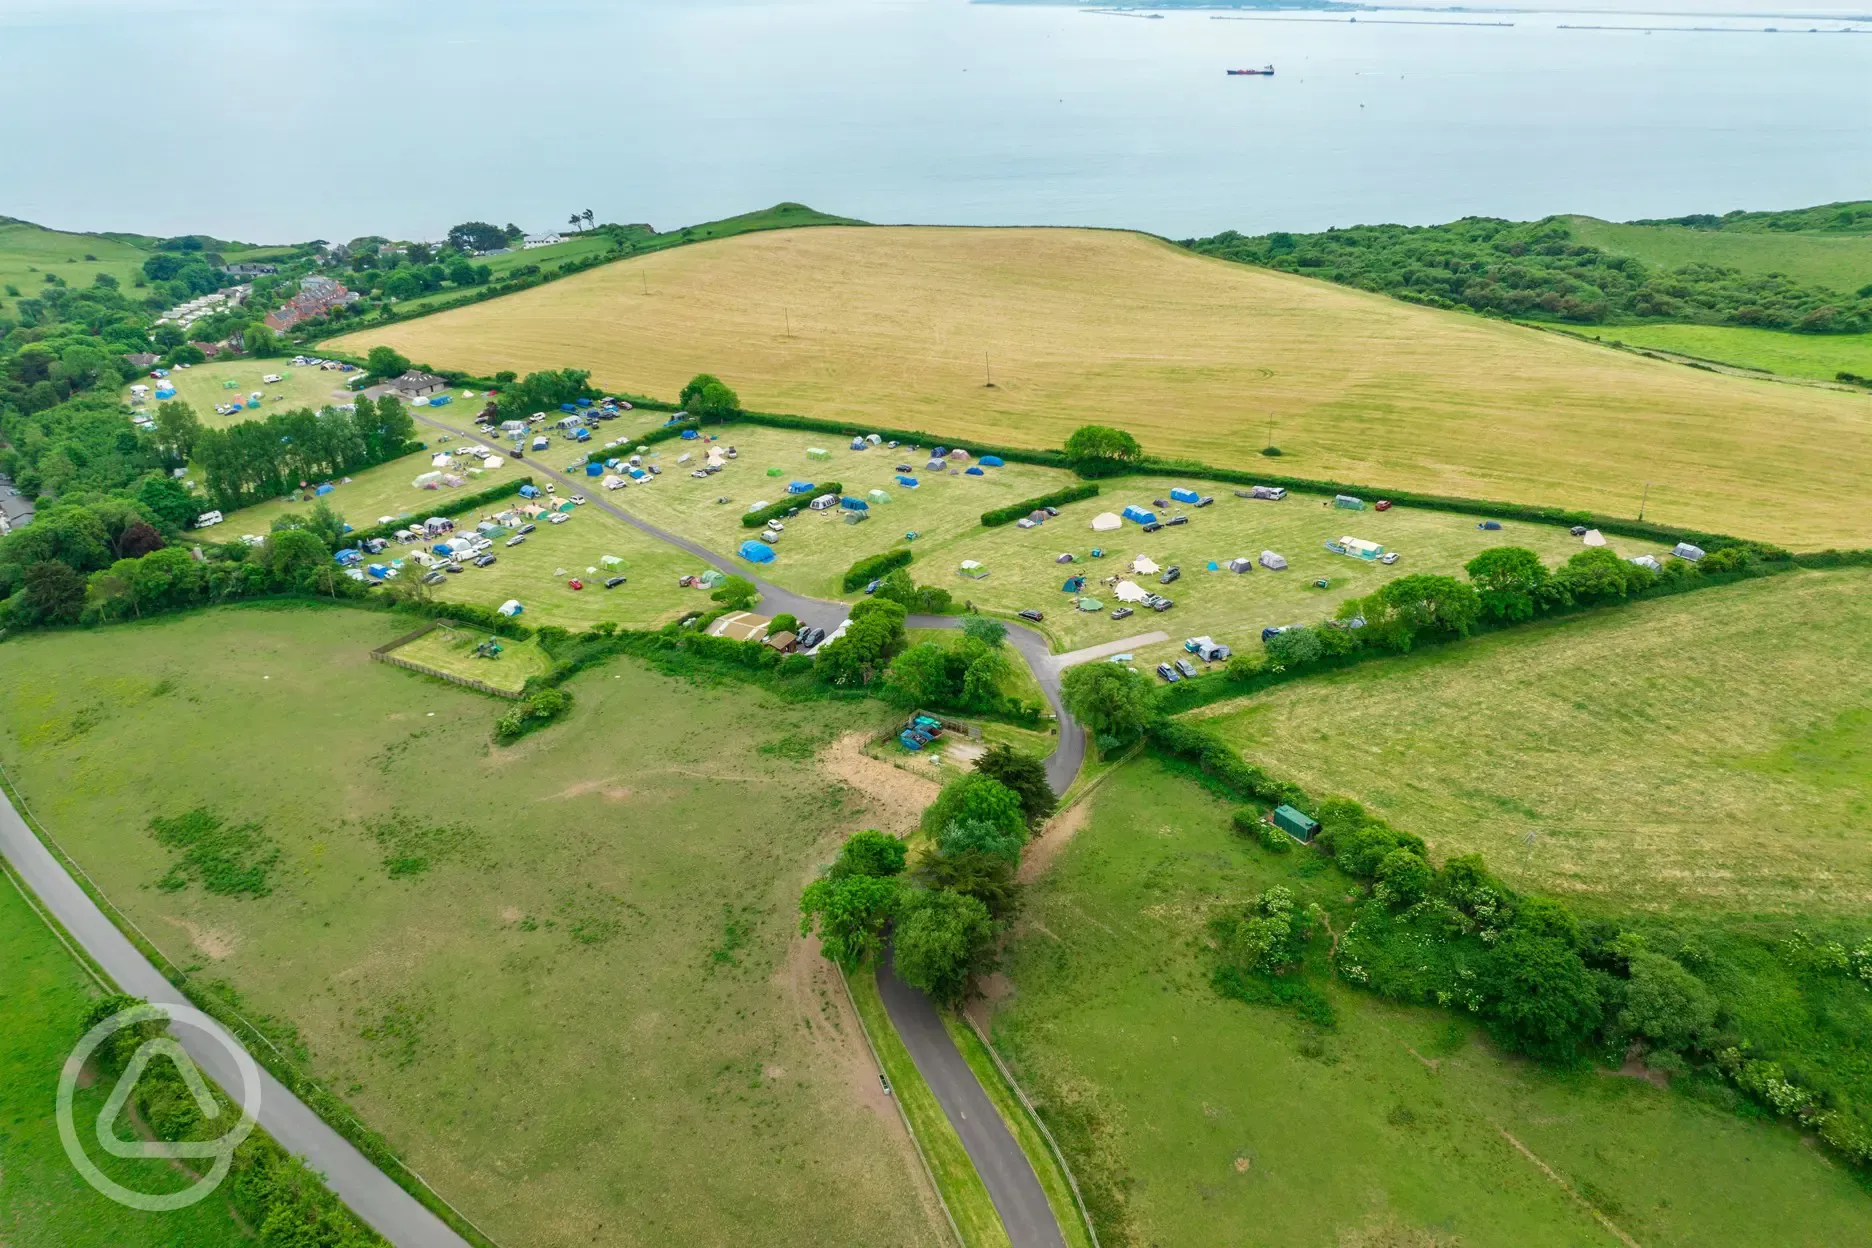 Aerial view of the campsite and coast